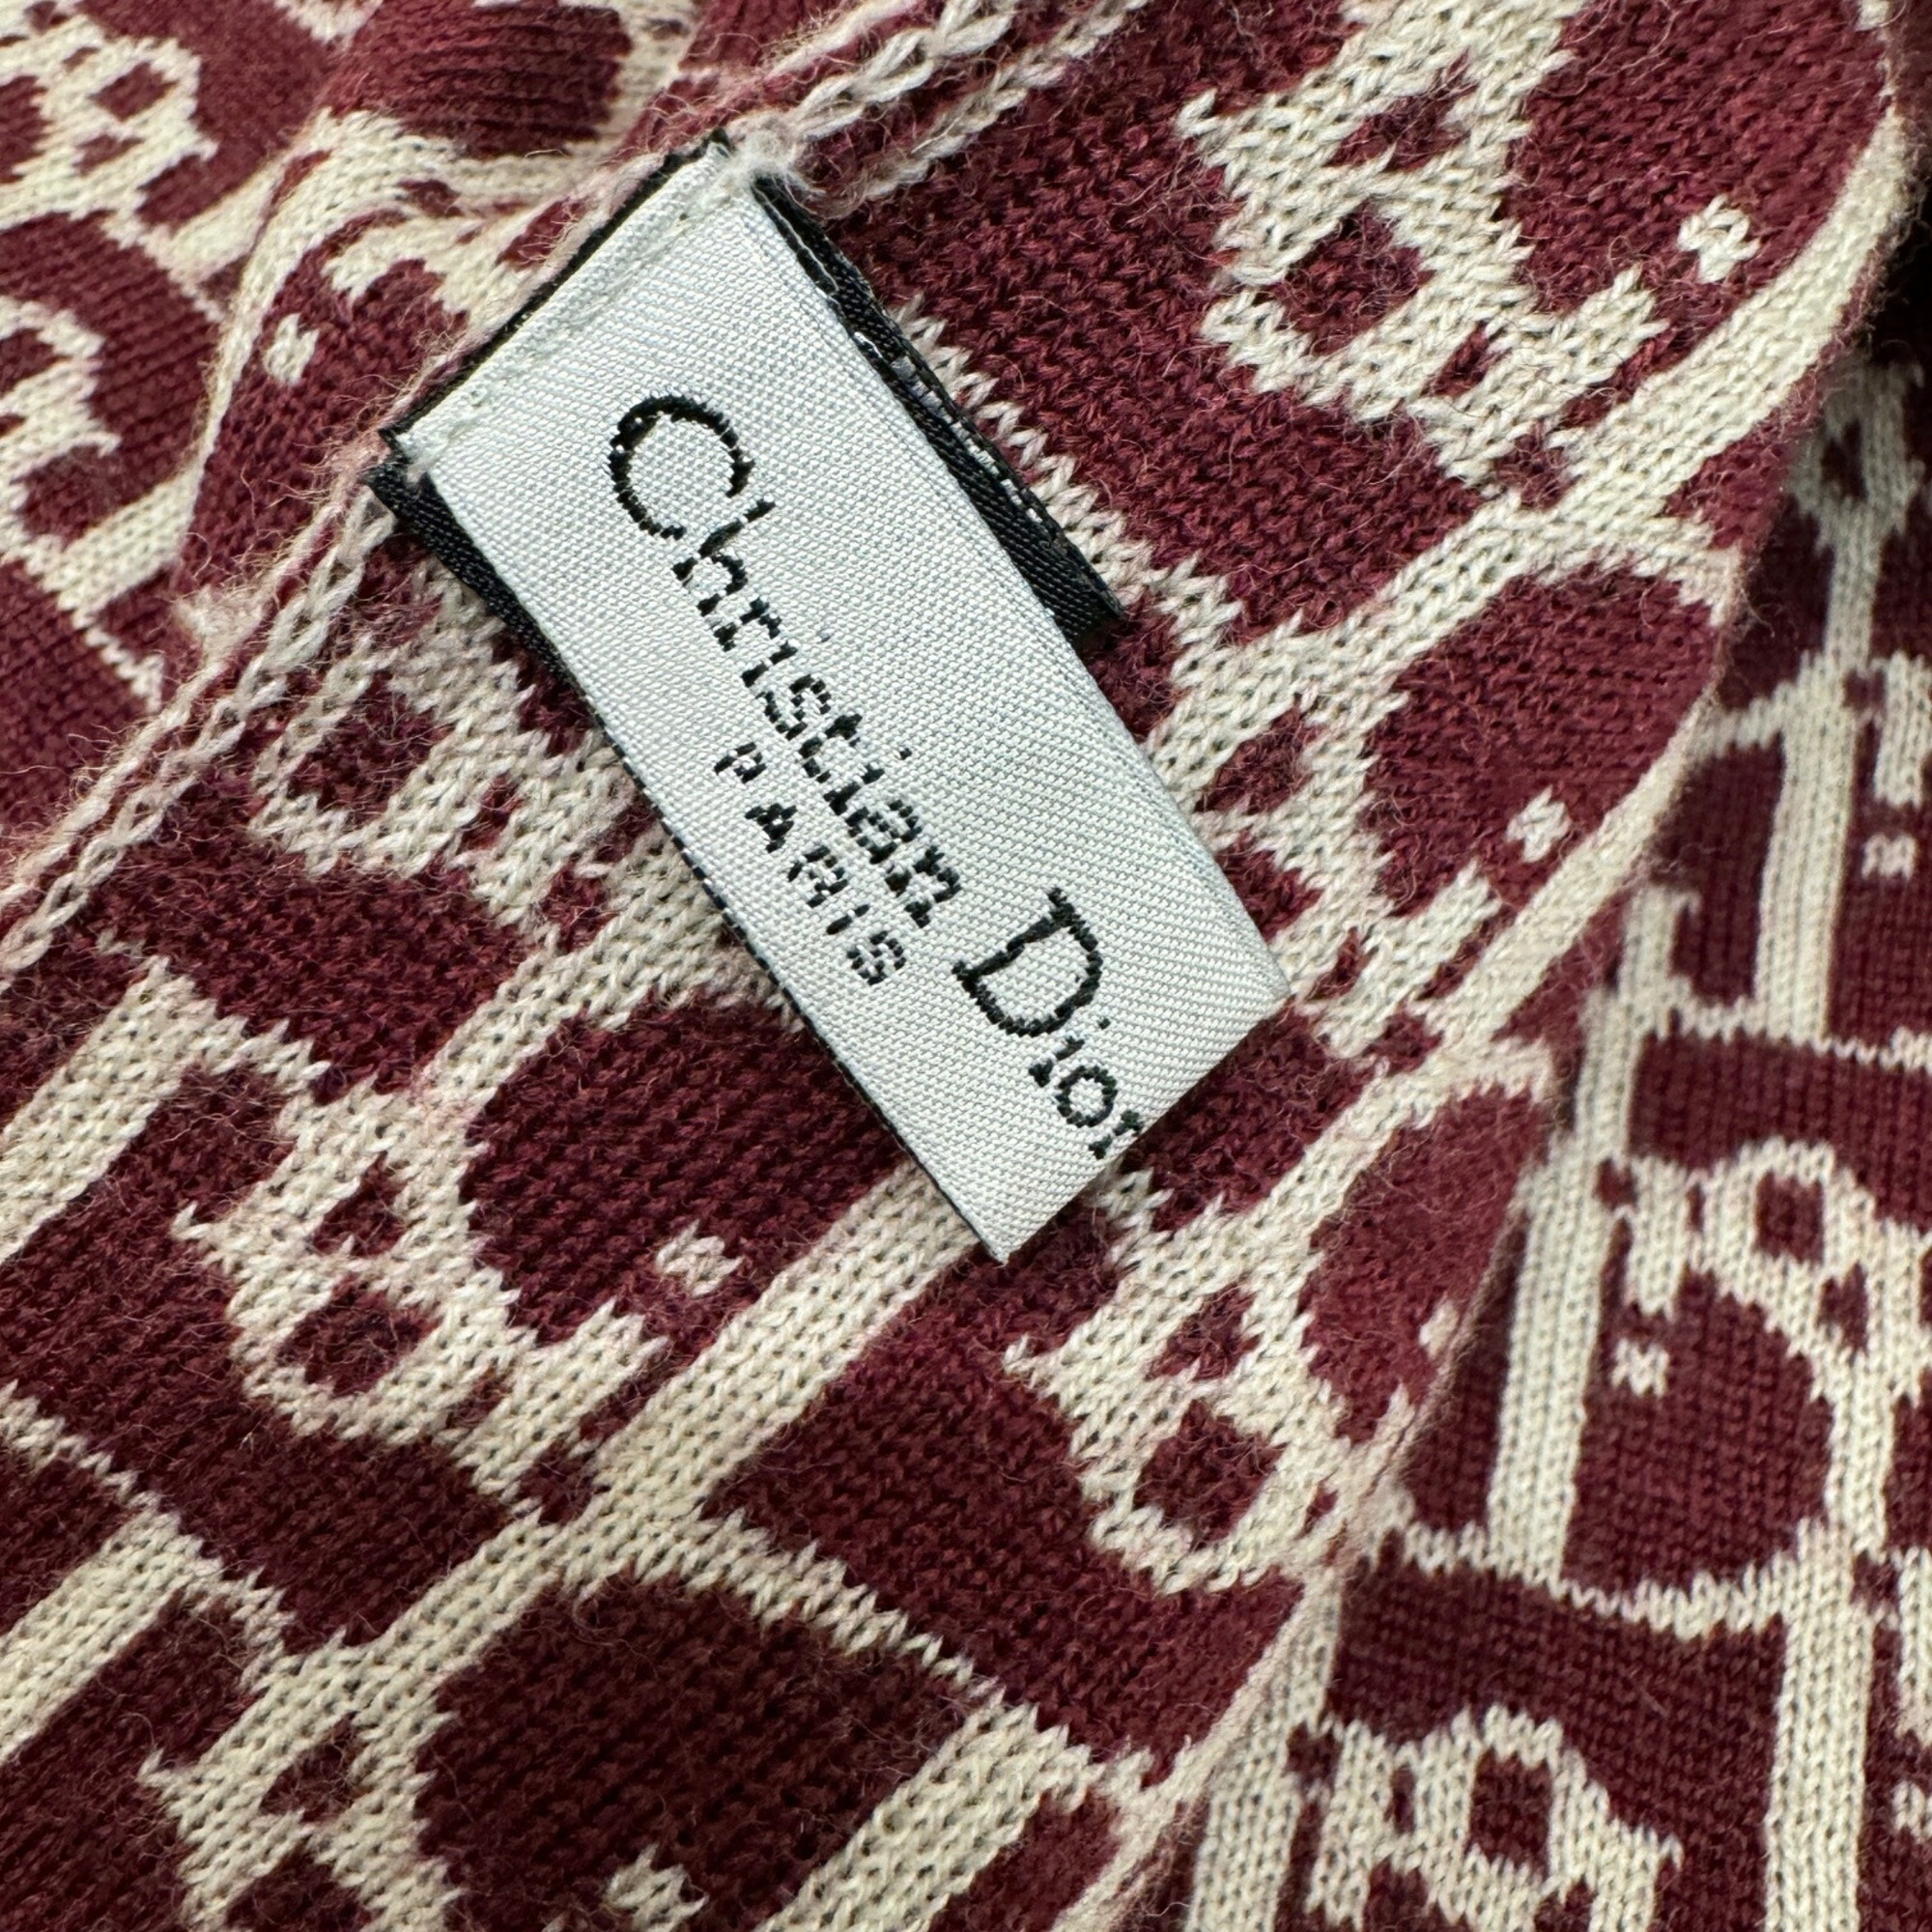 CHRISITIAN DIOR Christian Dior Muffler Trotter Pattern Wine Red Bordeaux Ivory Reversible 100% Wool Jacquard Ladies